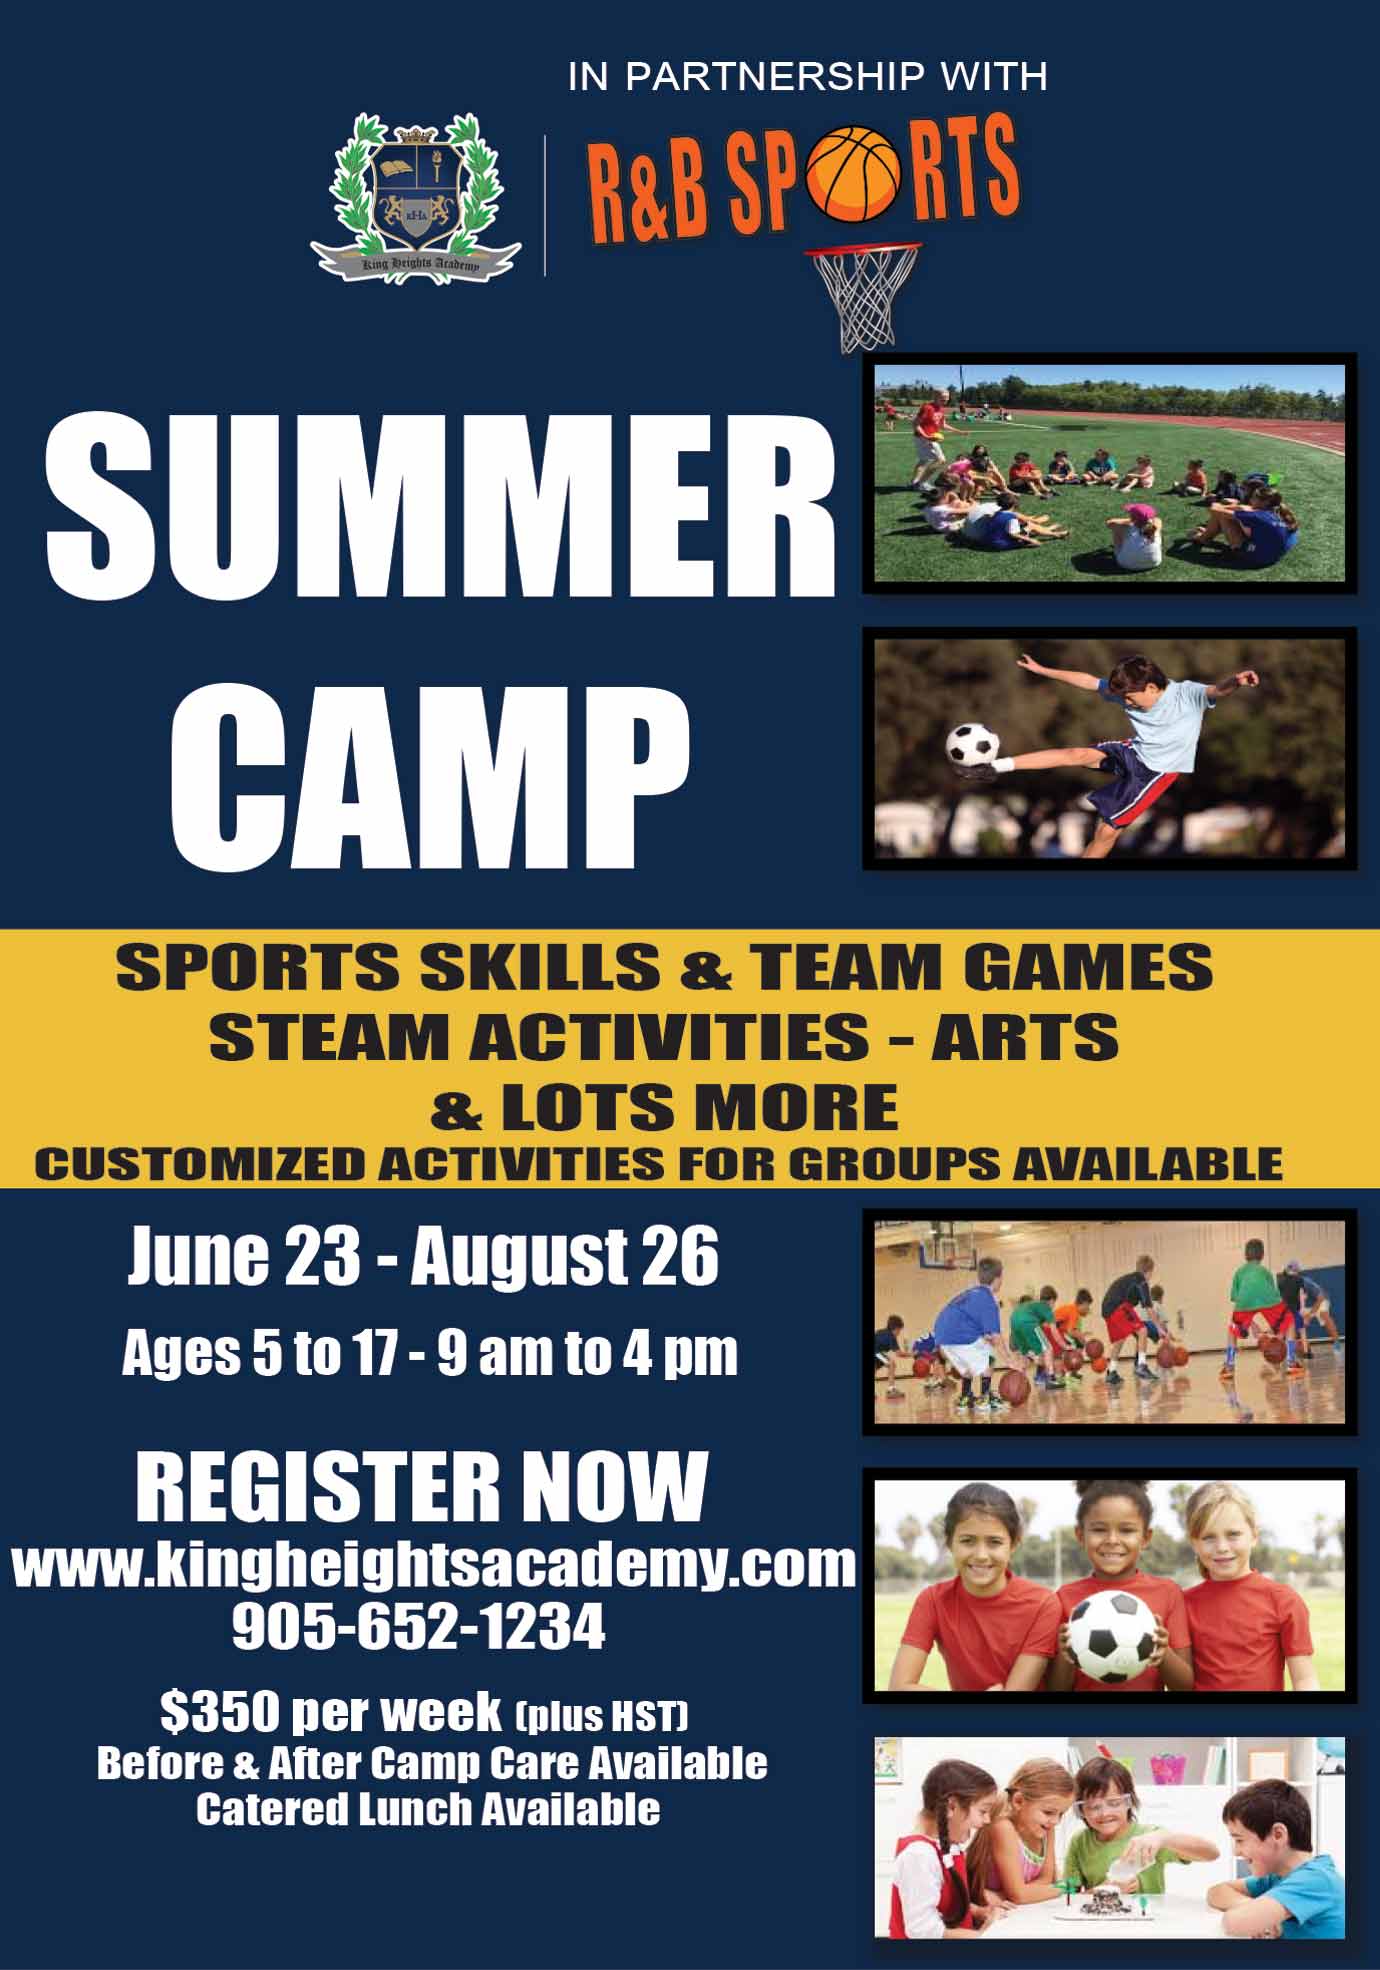 June 23, 2022 – August 26, 2022 | Ages 5 to 17 | 9 am to 4 pm